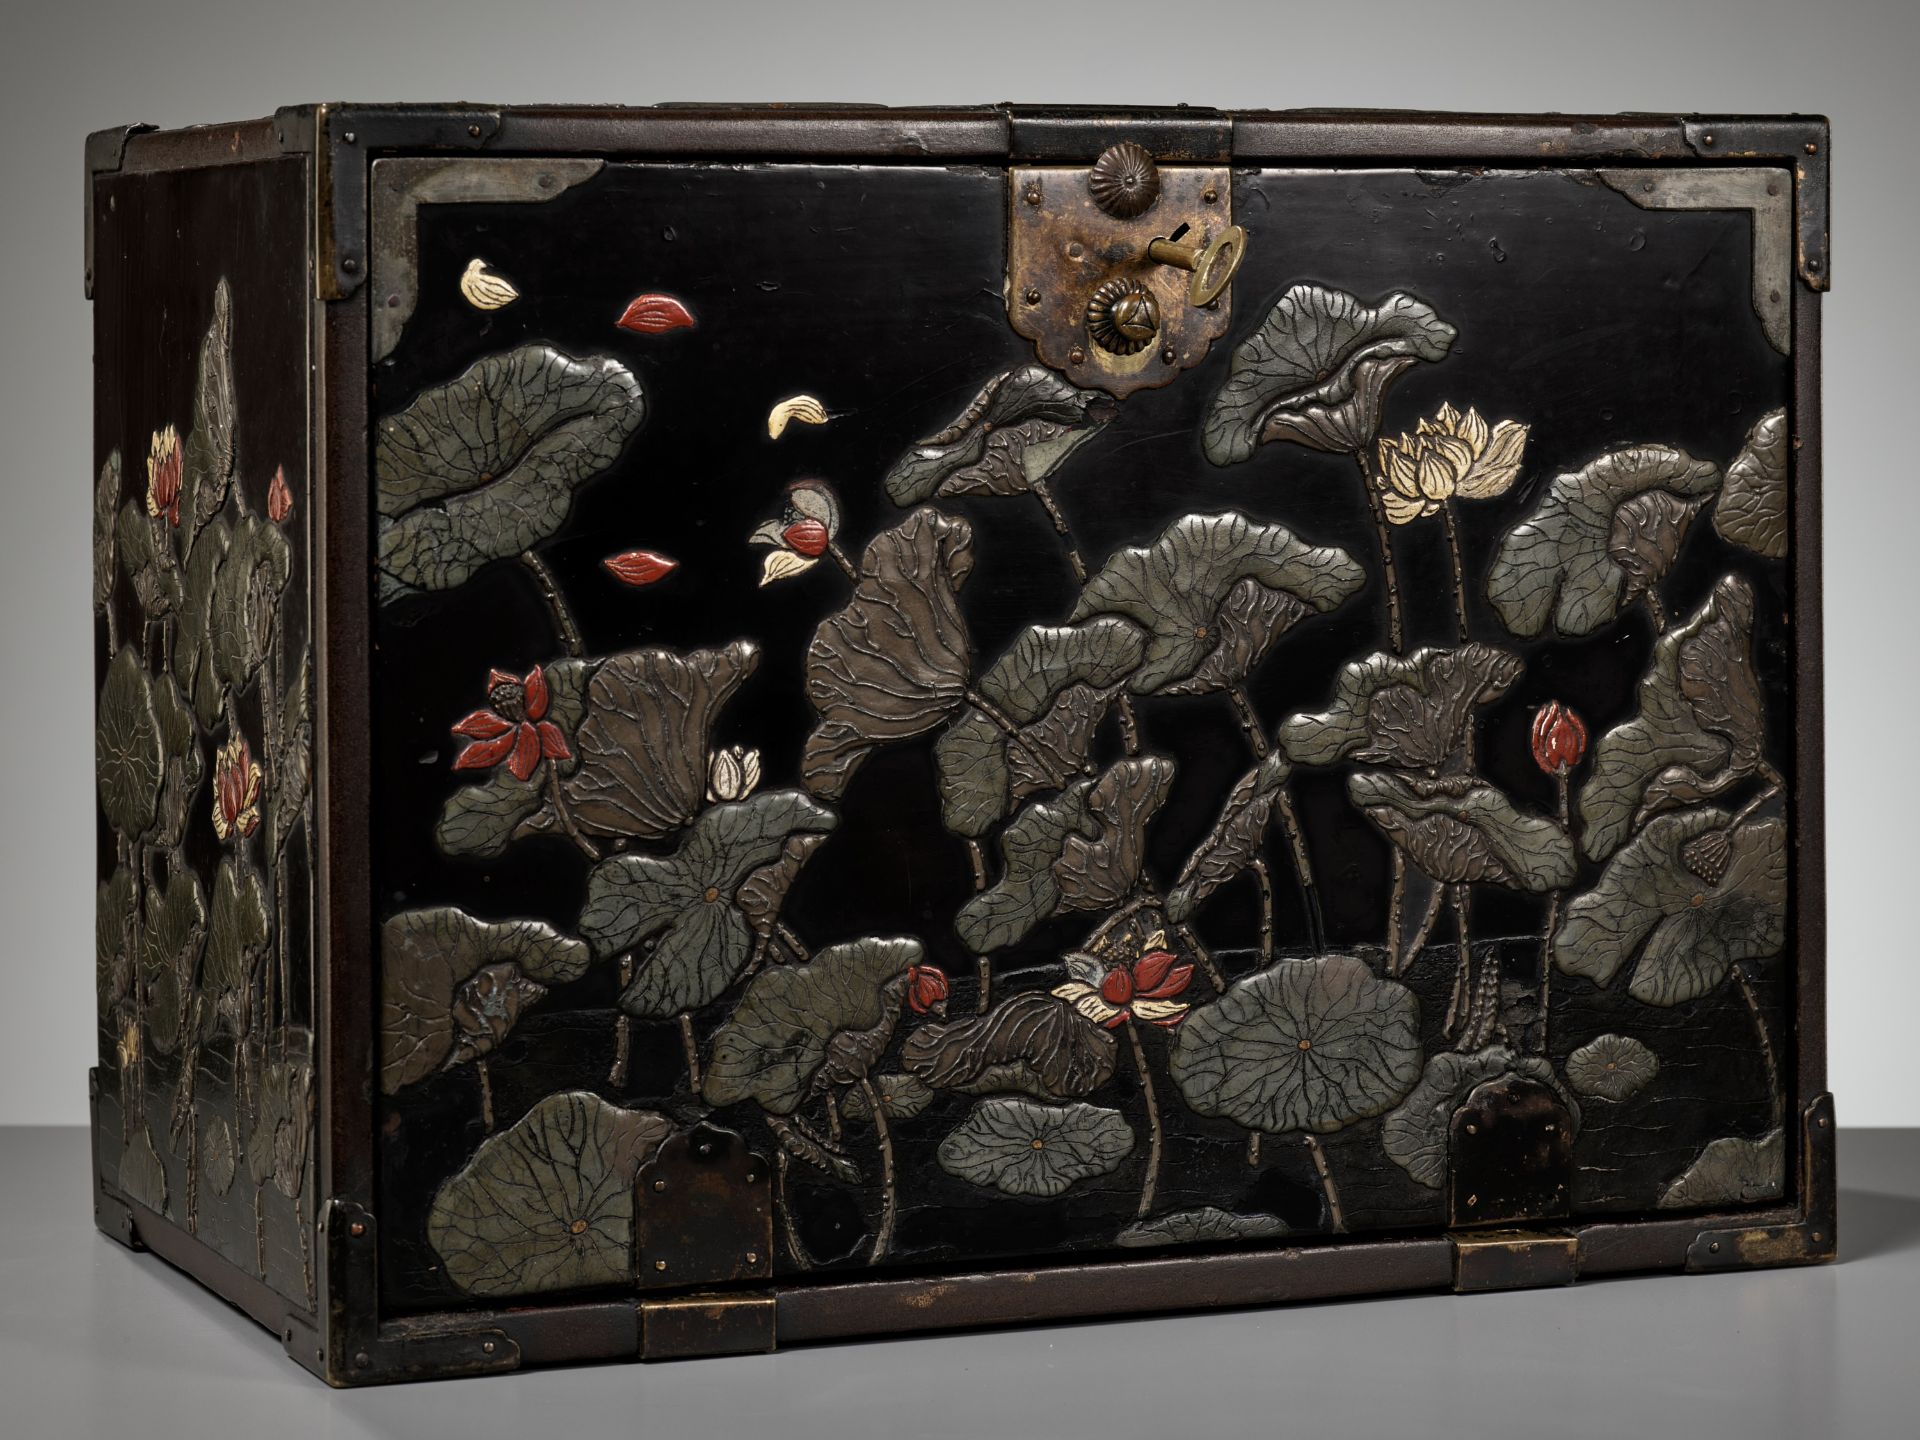 A RITSUO STYLE CERAMIC-INLAID AND LACQUERED WOOD KODANSU (CABINET) WITH A LOTUS POND AND EGRETS - Image 12 of 14